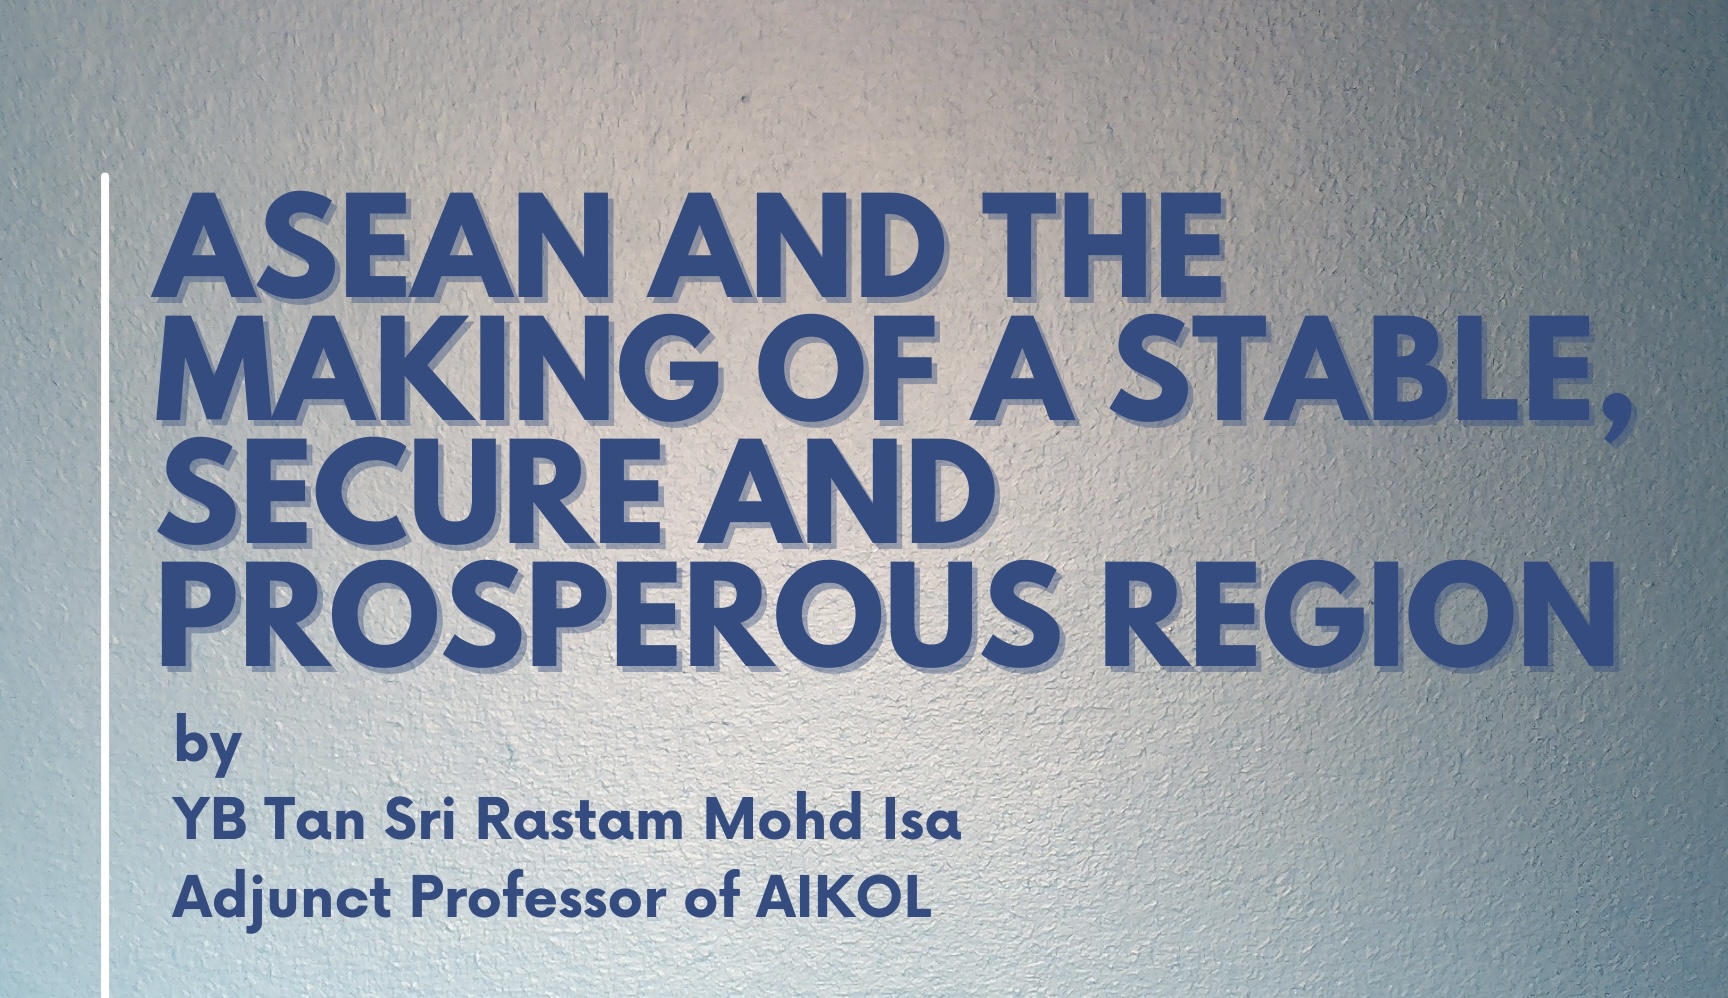 SPECIAL LECTURE BY YB TAN SRI RASTAM MOHD ISA, ADJUNCT PROFESSOR OF AIKOL